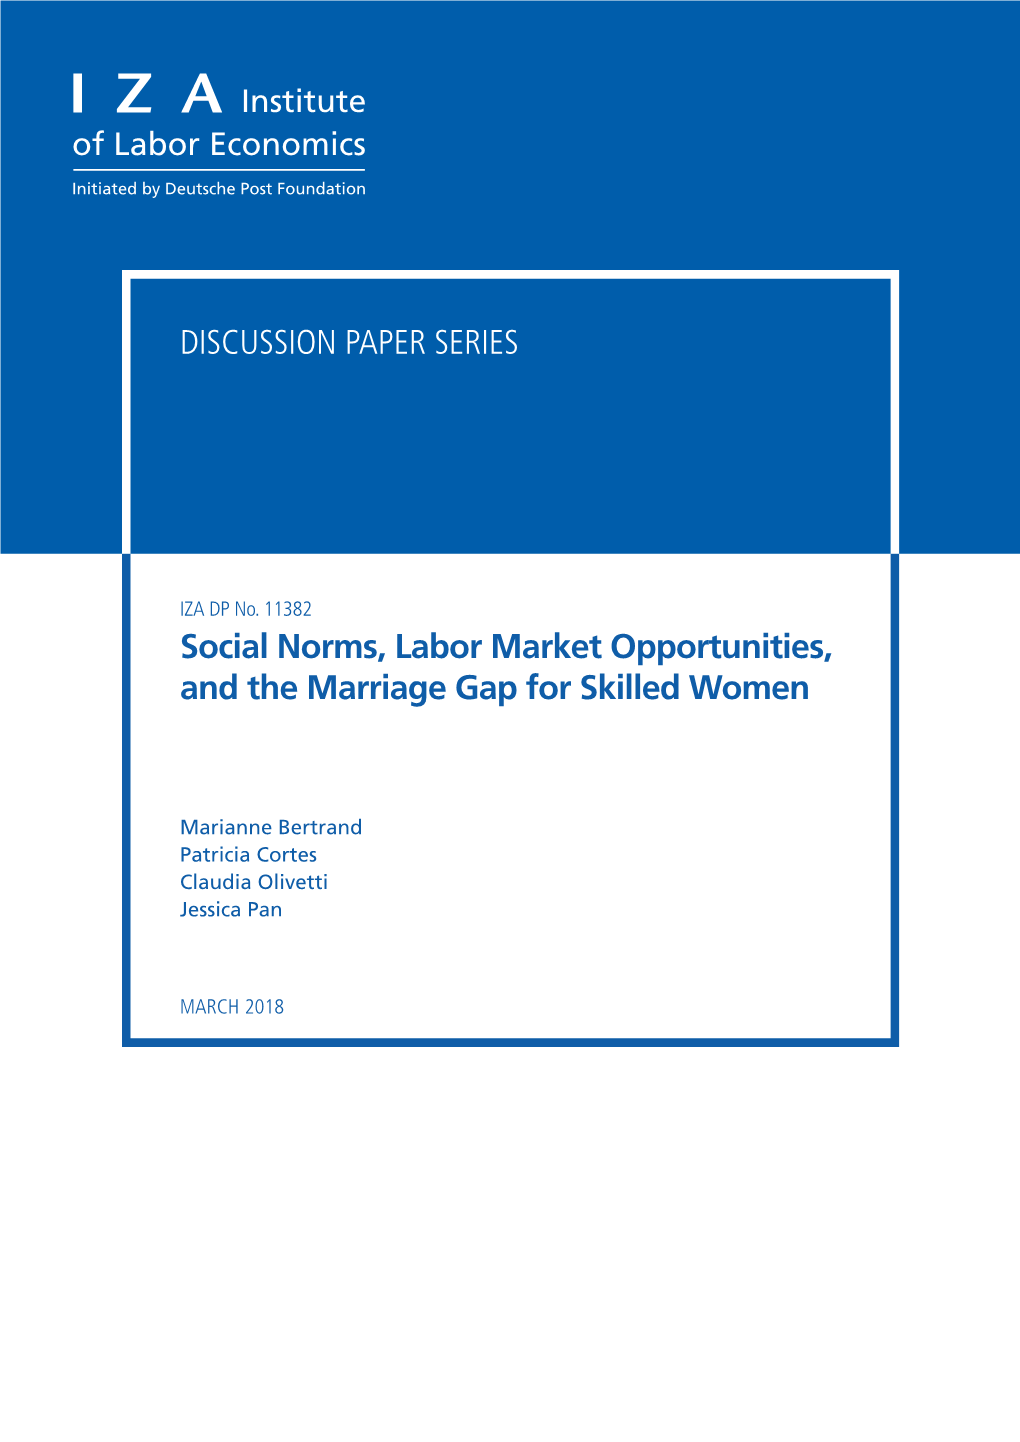 Social Norms, Labor Market Opportunities, and the Marriage Gap for Skilled Women